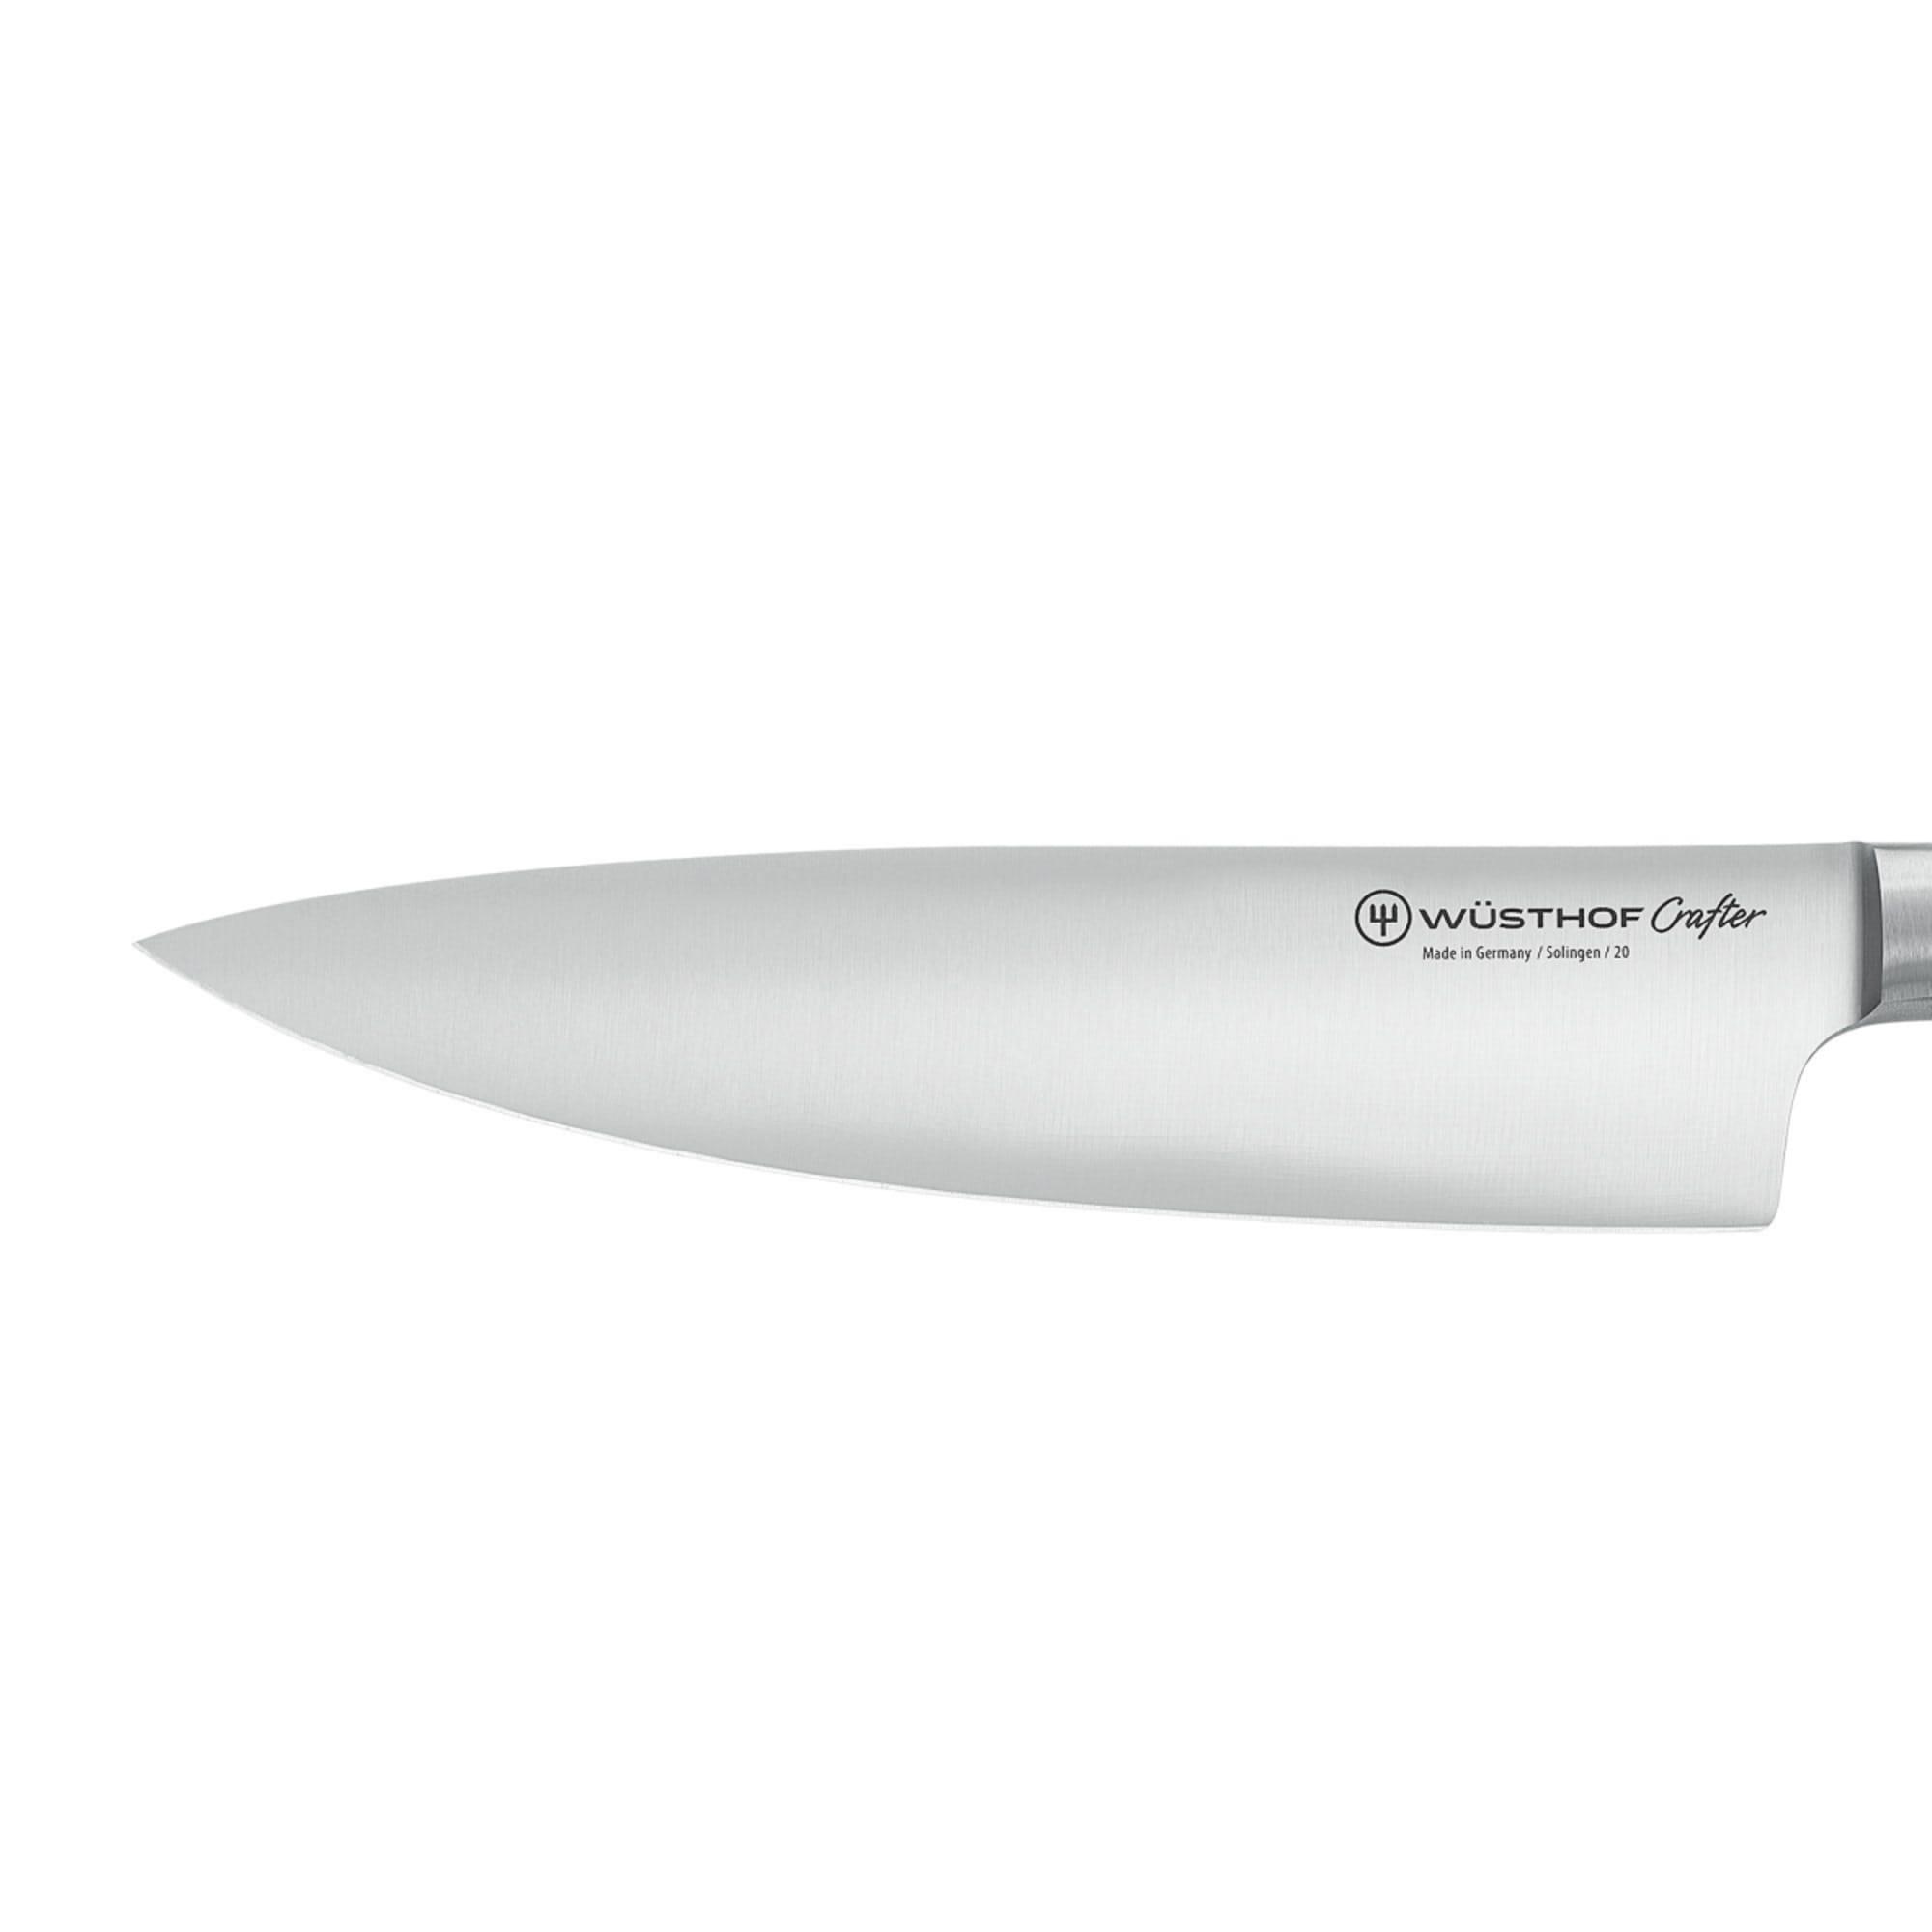 Wusthof Crafter Cook's Knife 20cm Image 3